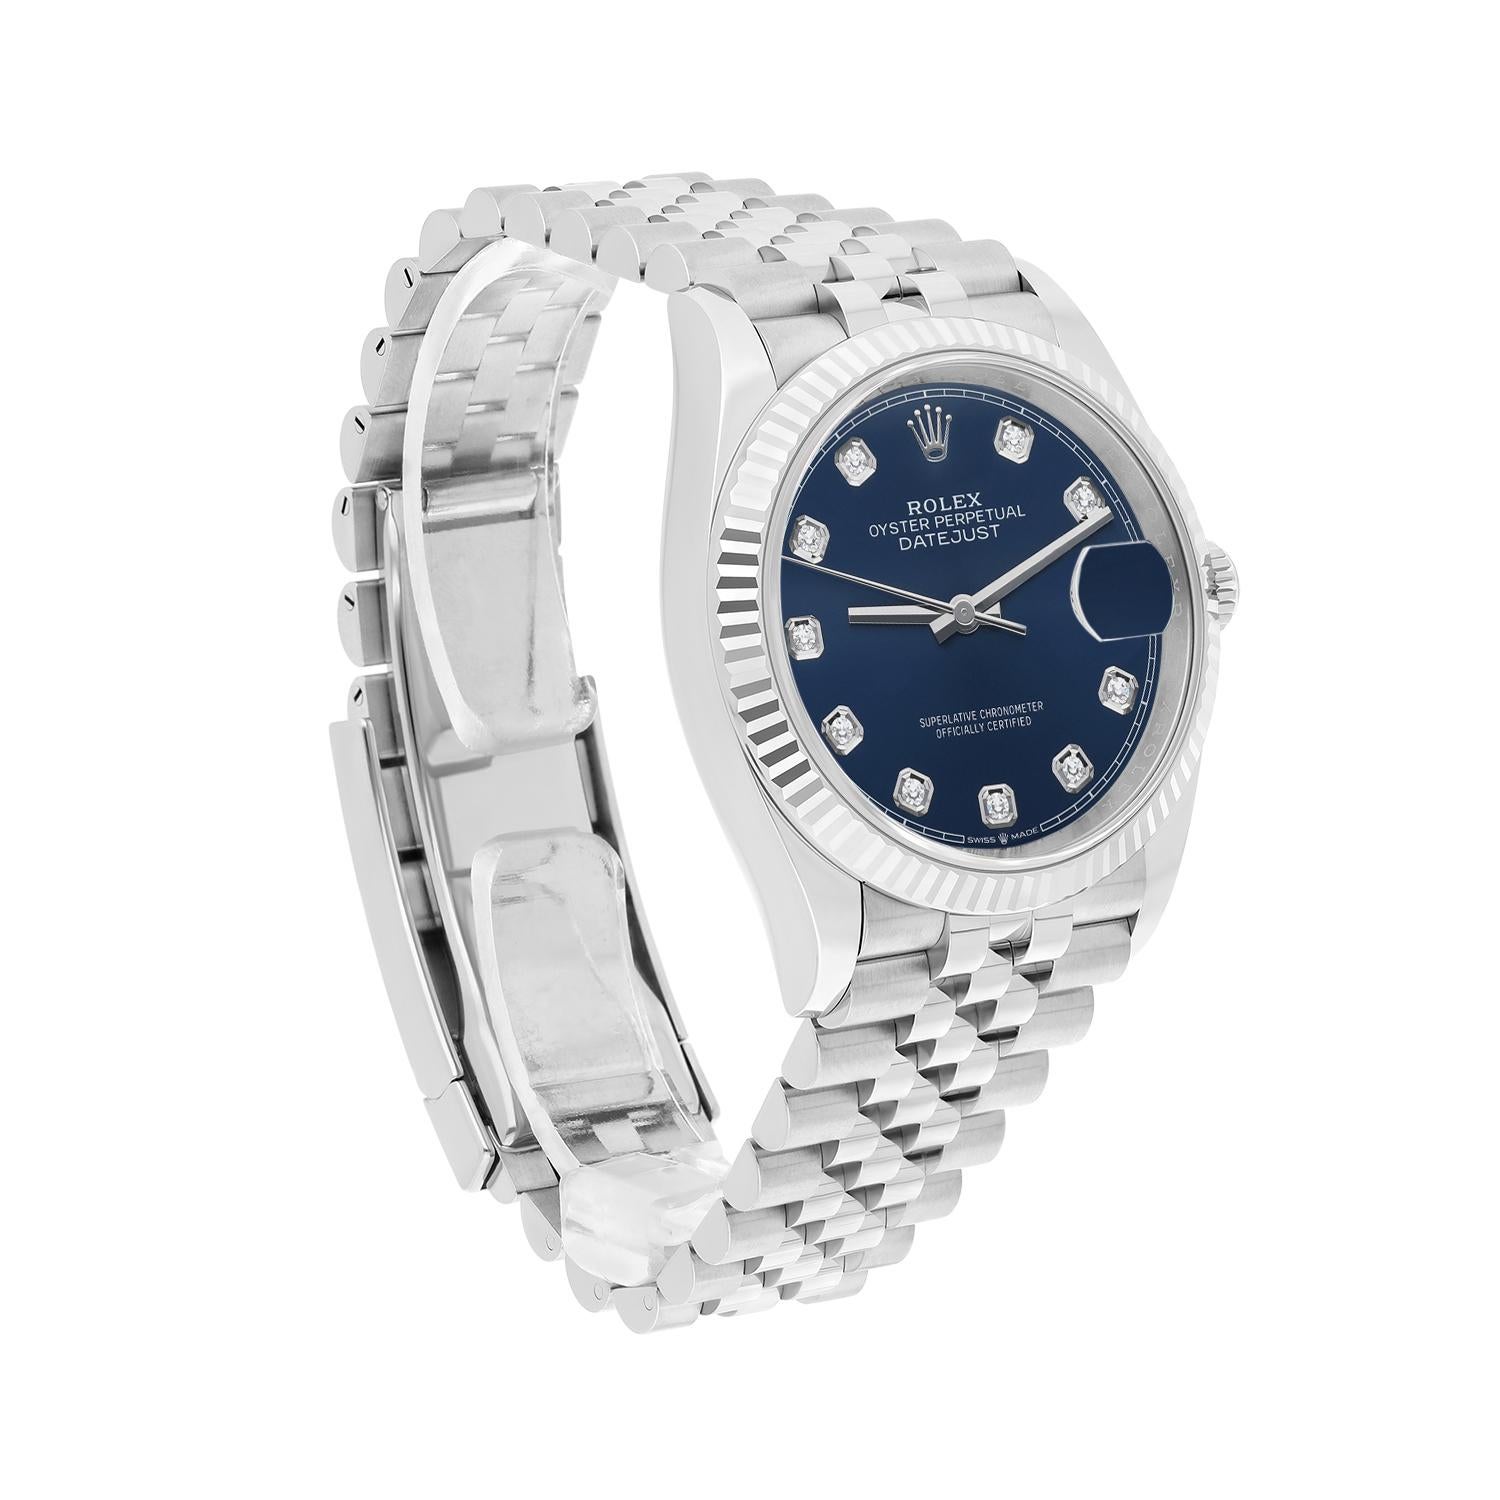 Rolex Datejust 126234 Steel 36mm Blue Diamond Dial Jubilee Bracelet Complete In Excellent Condition For Sale In New York, NY